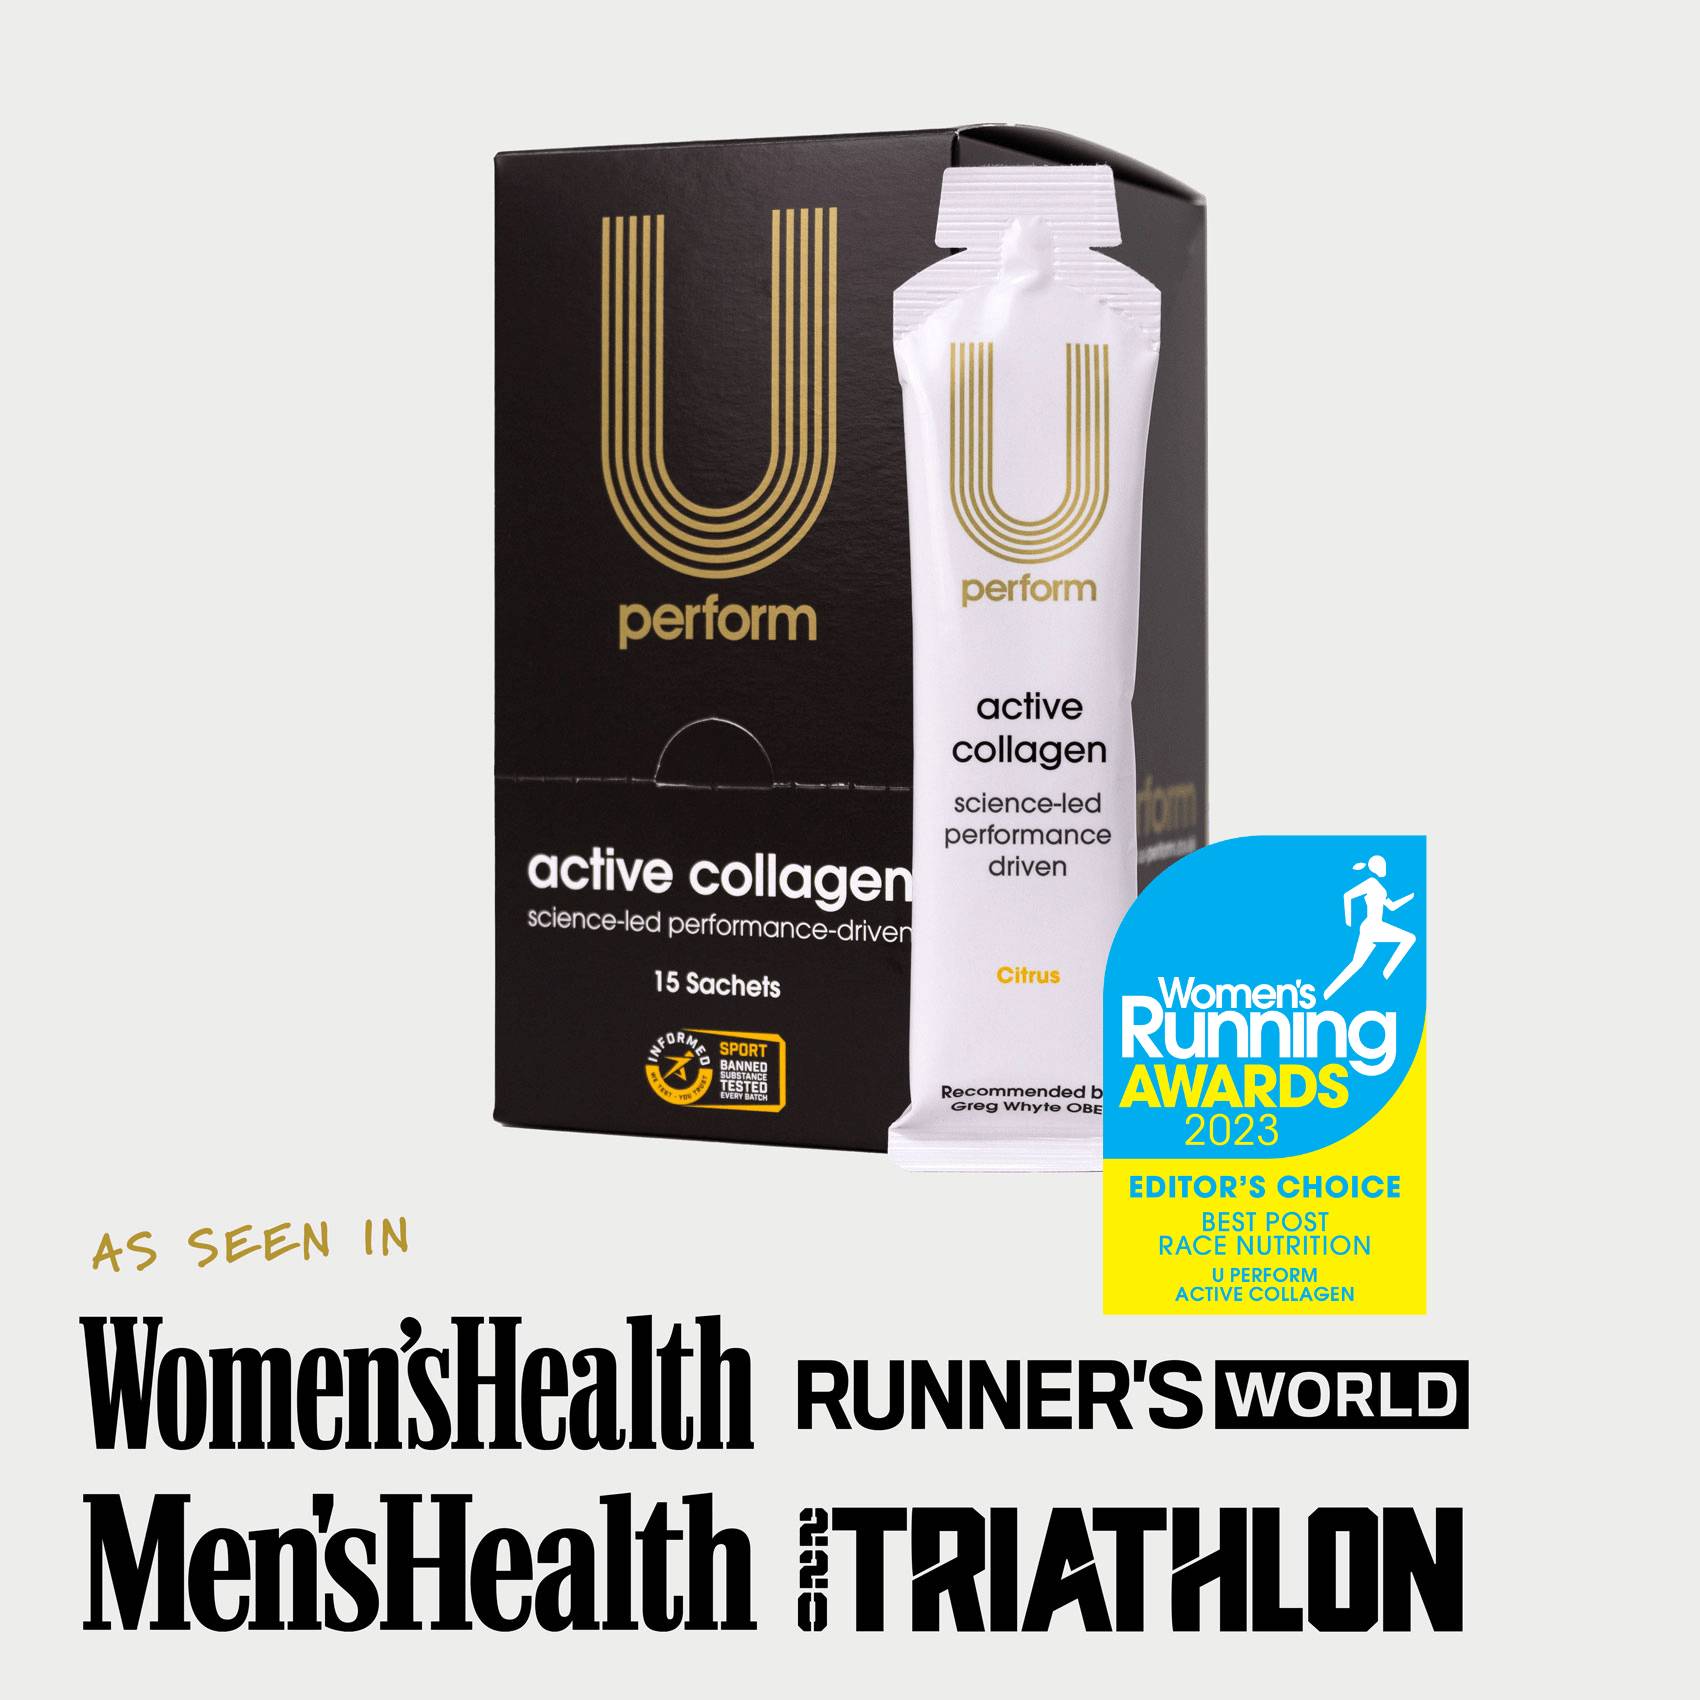 U Perform Active Collagen UK No.1 Sports Collagen for Injury Prevention and Injury Recovery shown alongside the logos of major magazines that it has featured in, including Women's Health, Men's Health, Runner's World, 220 Triathlon, and the Women's Running Product Awards